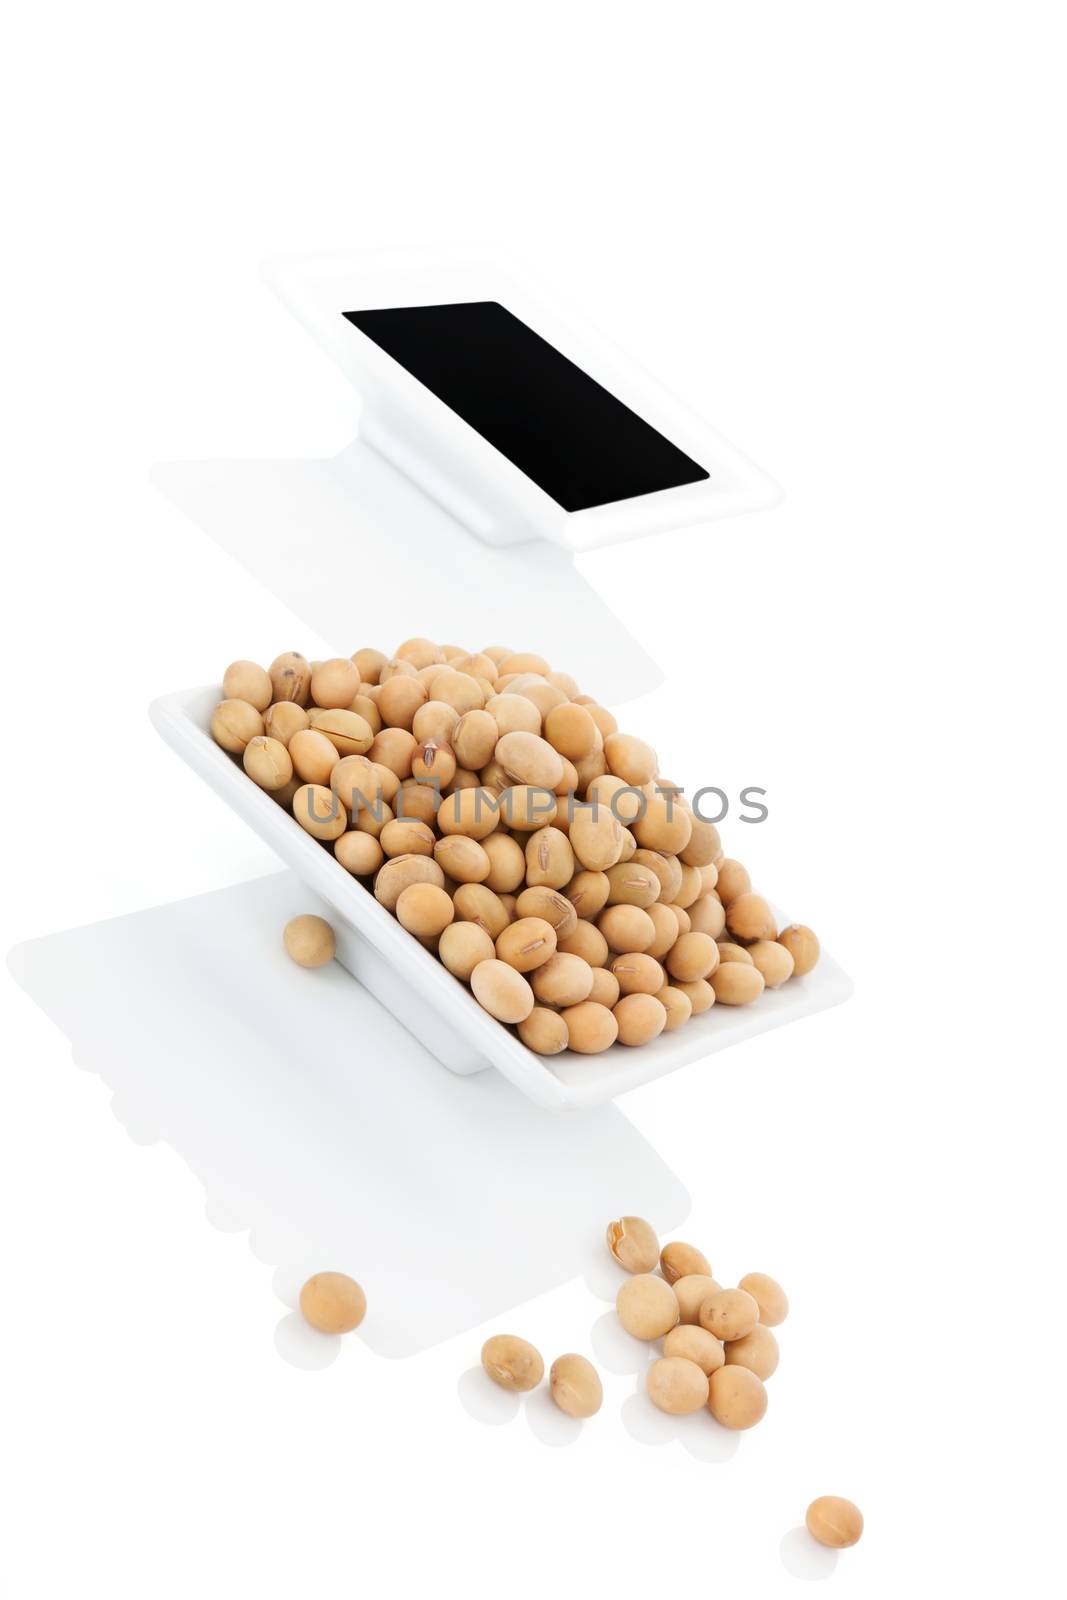 Soya sauce and soybeans in bowls isolated on white background. Culinary soya concept.